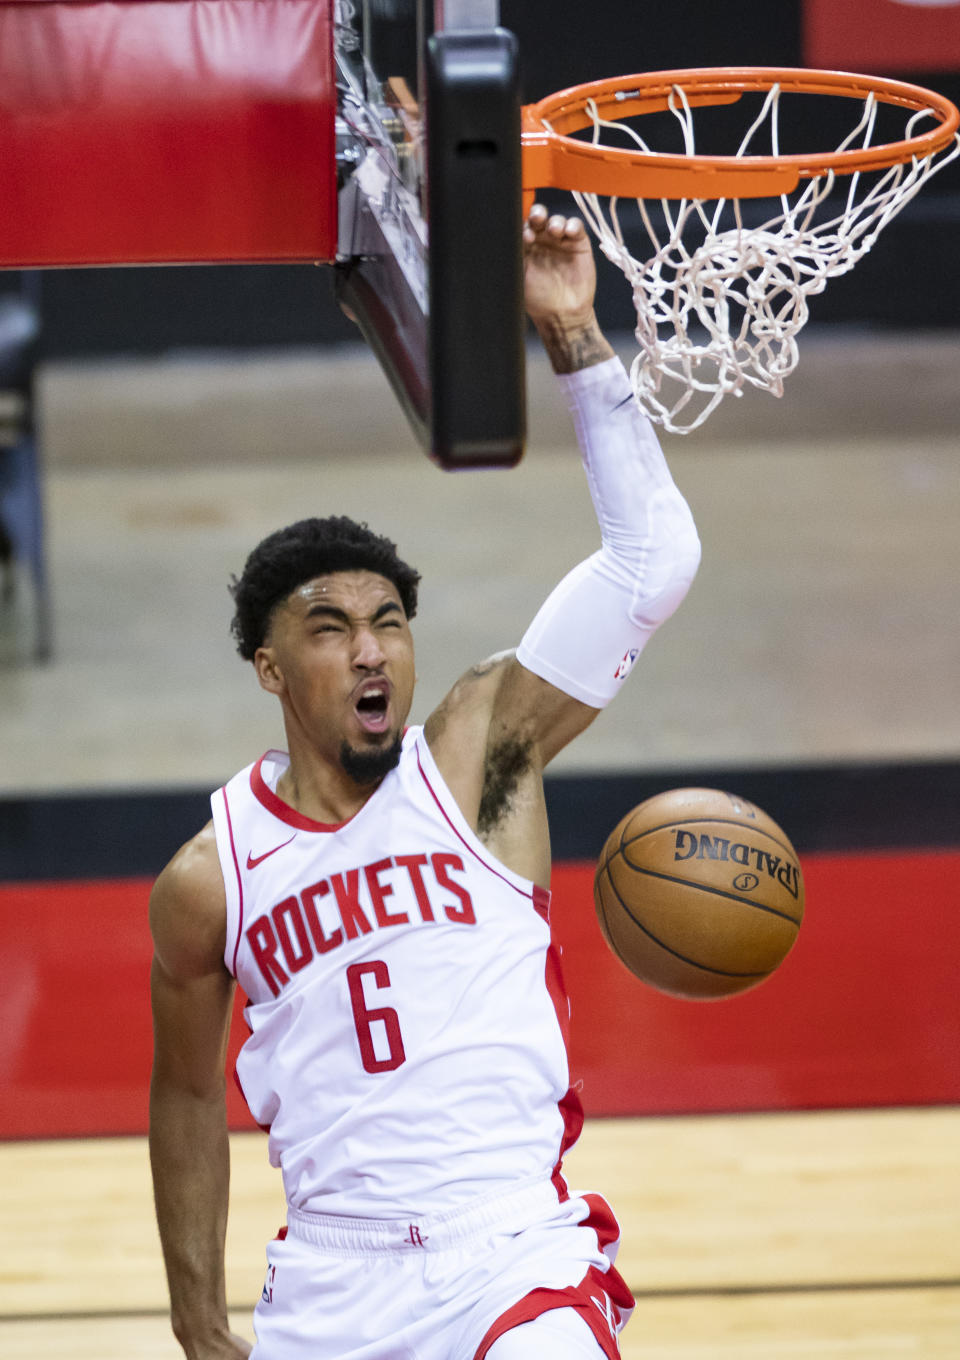 Houston Rockets forward Kenyon Martin Jr. dunks against the Los Angeles Clippers during the third quarter of an NBA basketball game Friday, May 14, 2021, in Houston. (Mark Mulligan/Houston Chronicle via AP)